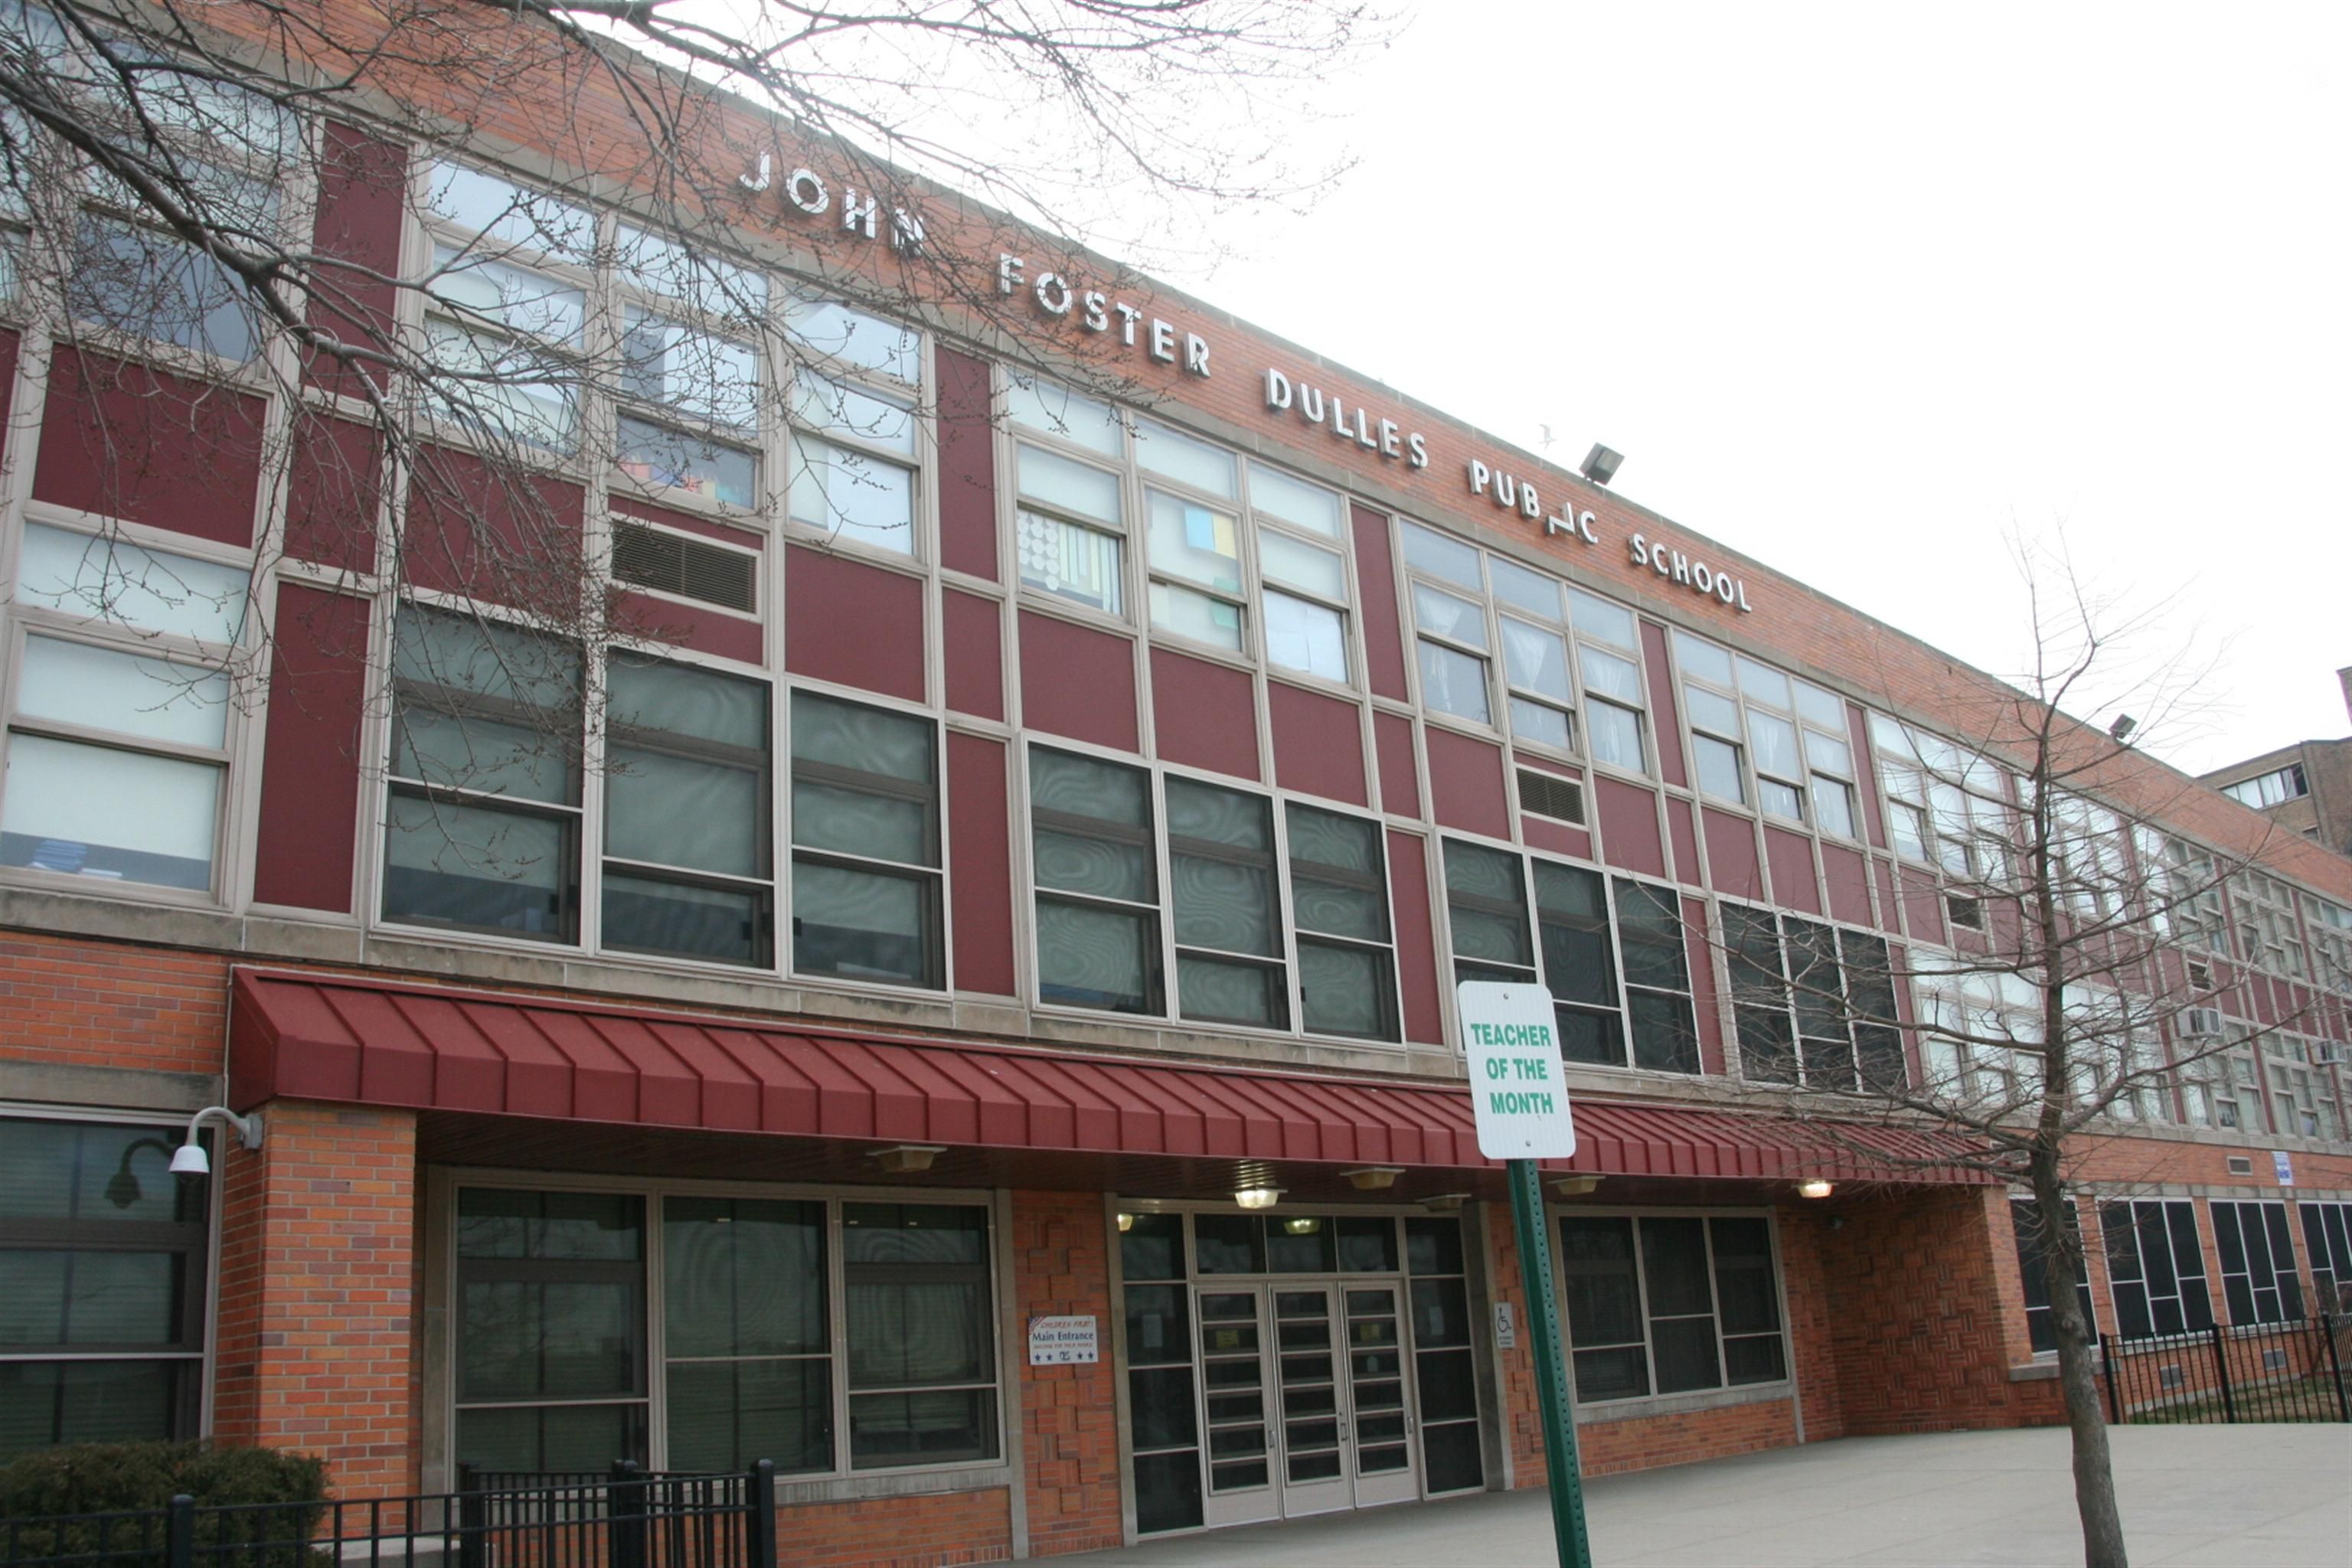 featured image John Foster Dulles Elementary School